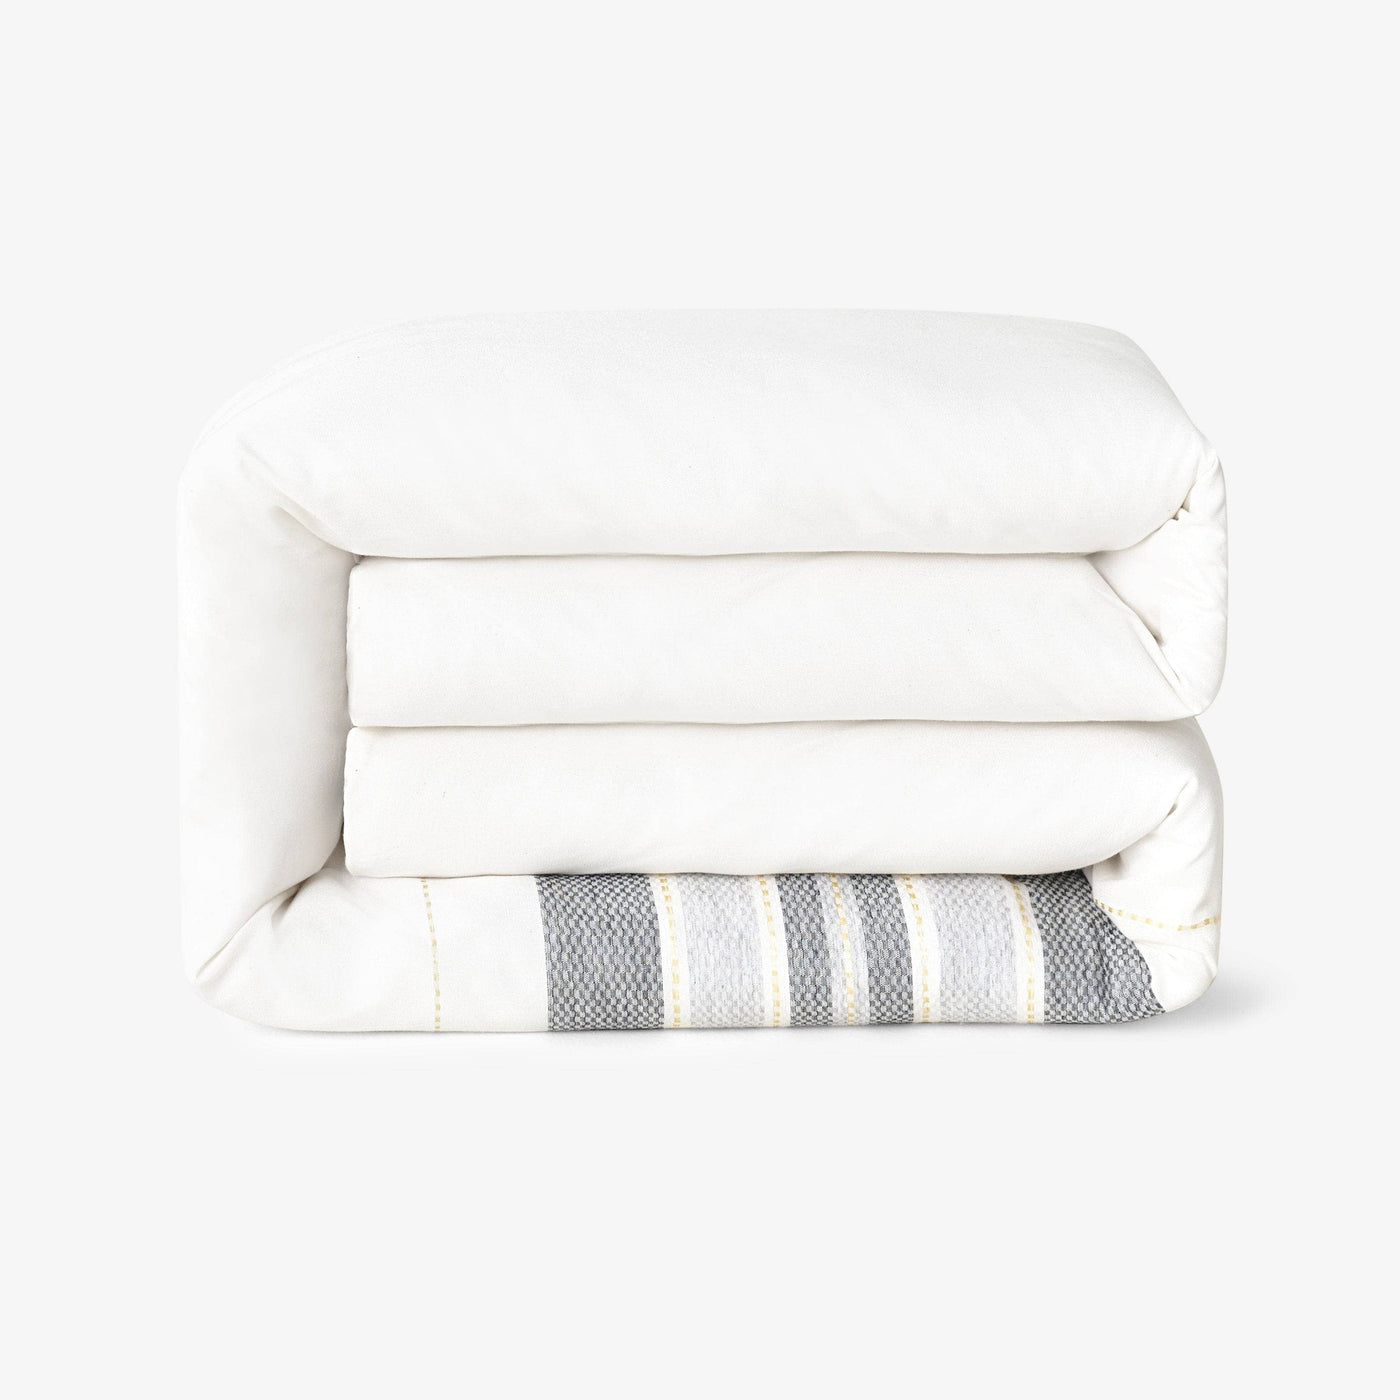 Cara Striped Turkish Cotton Duvet Cover Set + Fitted Sheet, Off-White - Anthracite Grey, King Size Bedding Sets sazy.com